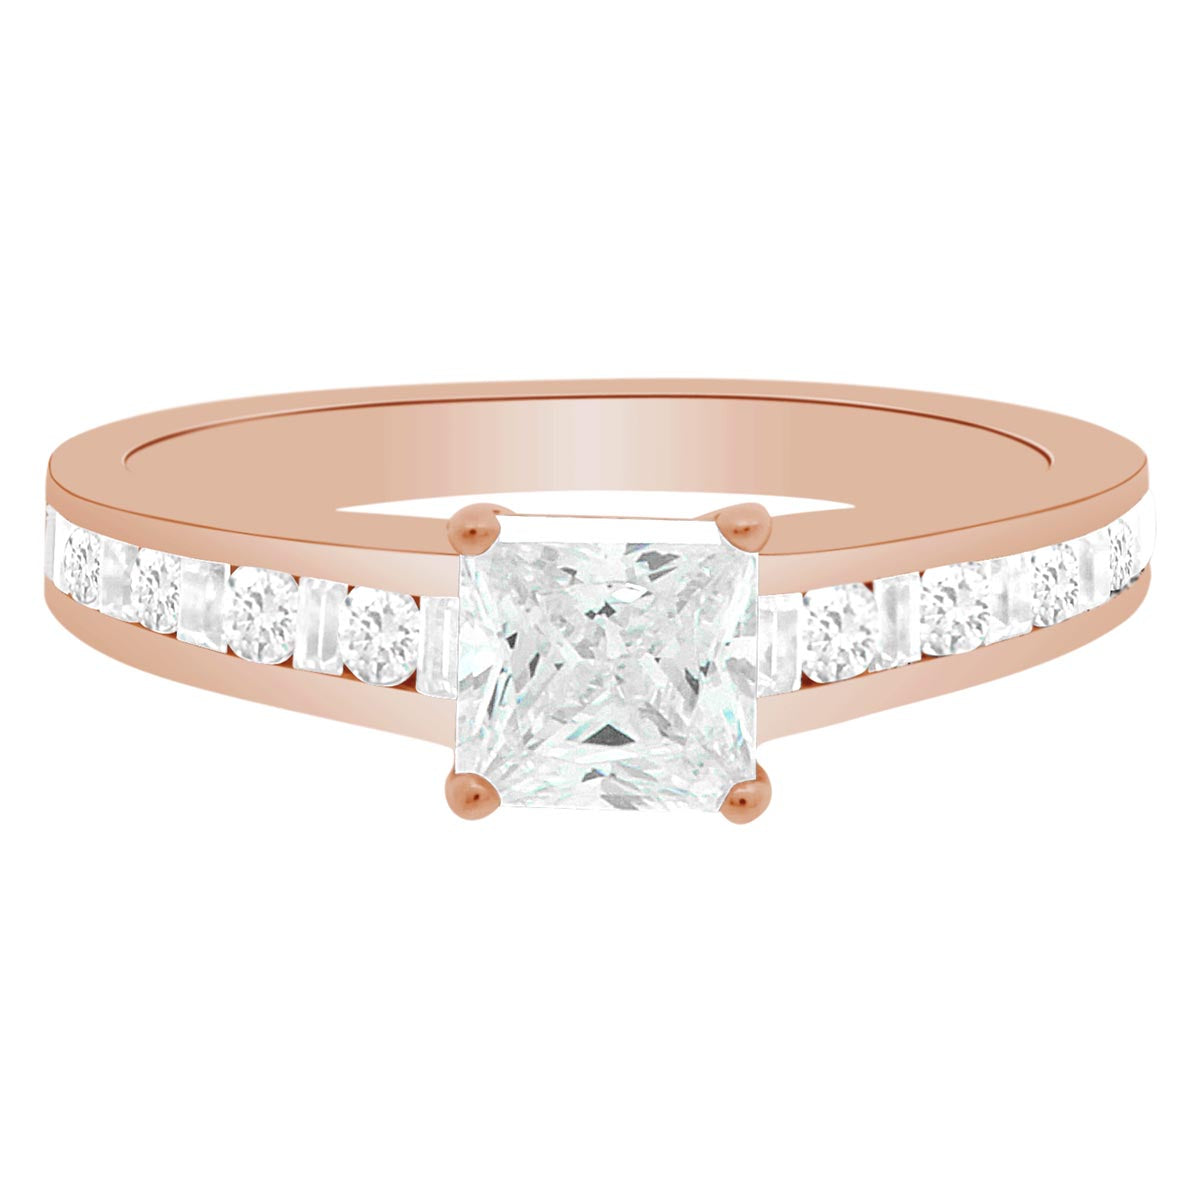 Fancy Cut Diamond Ring made from rose gold